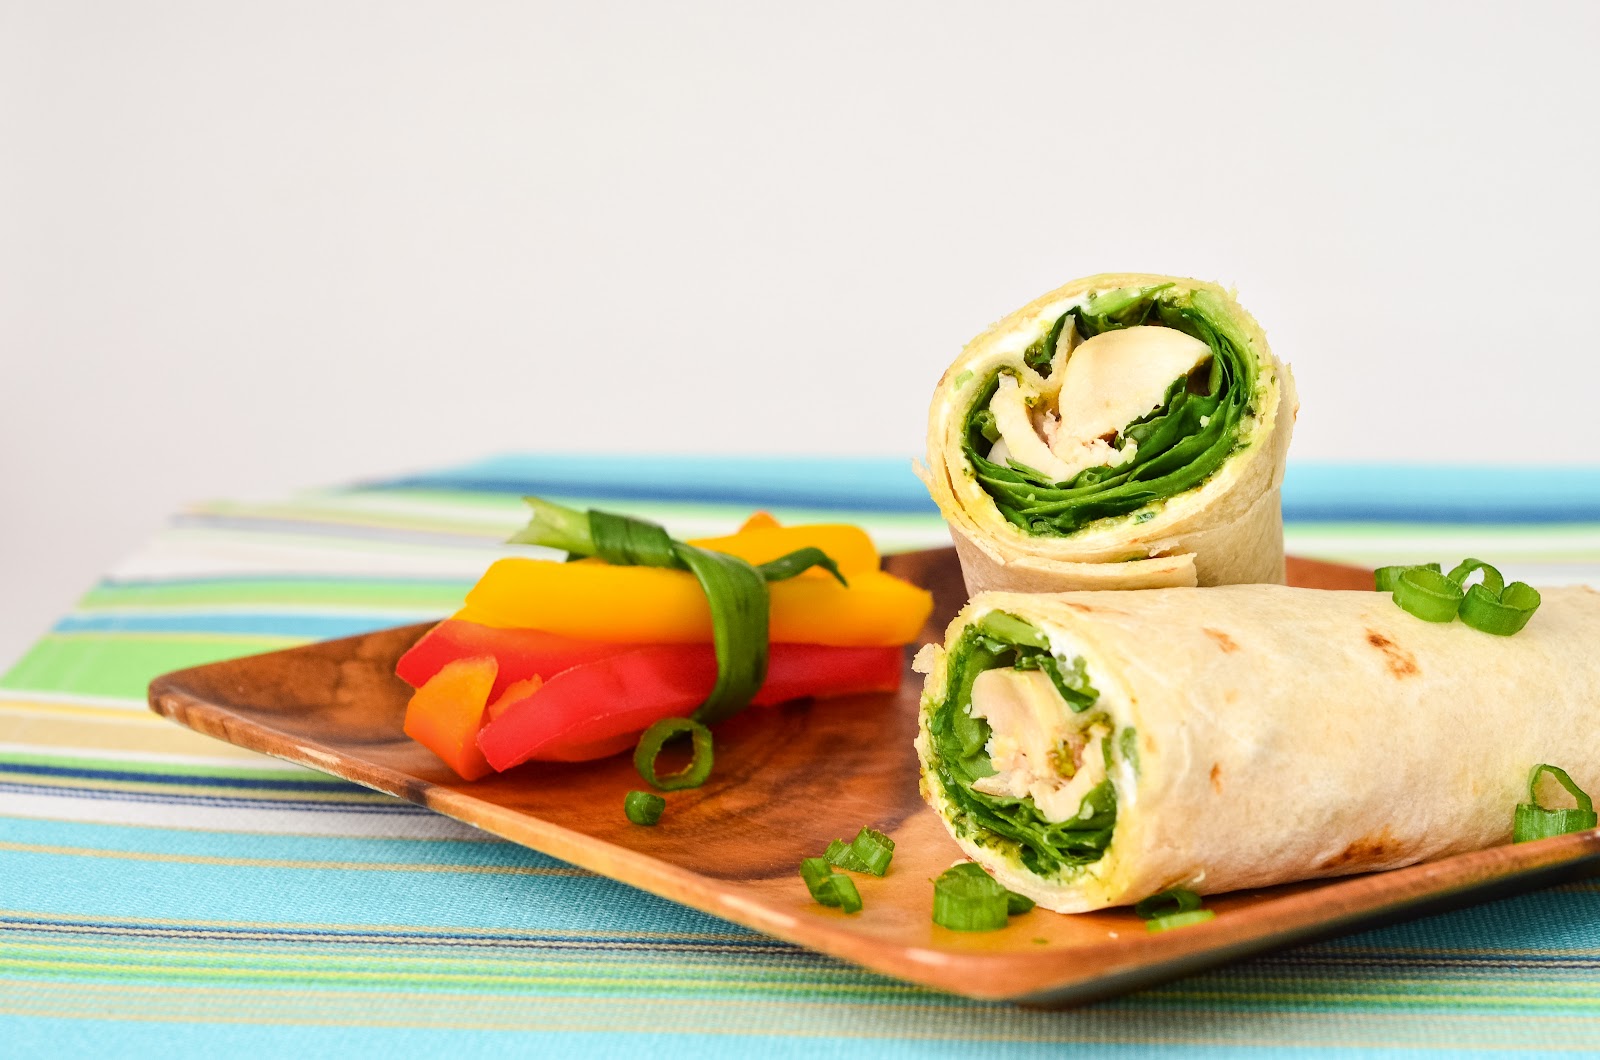 Meal Planning Made Simple: Pesto Chicken Roll-ups